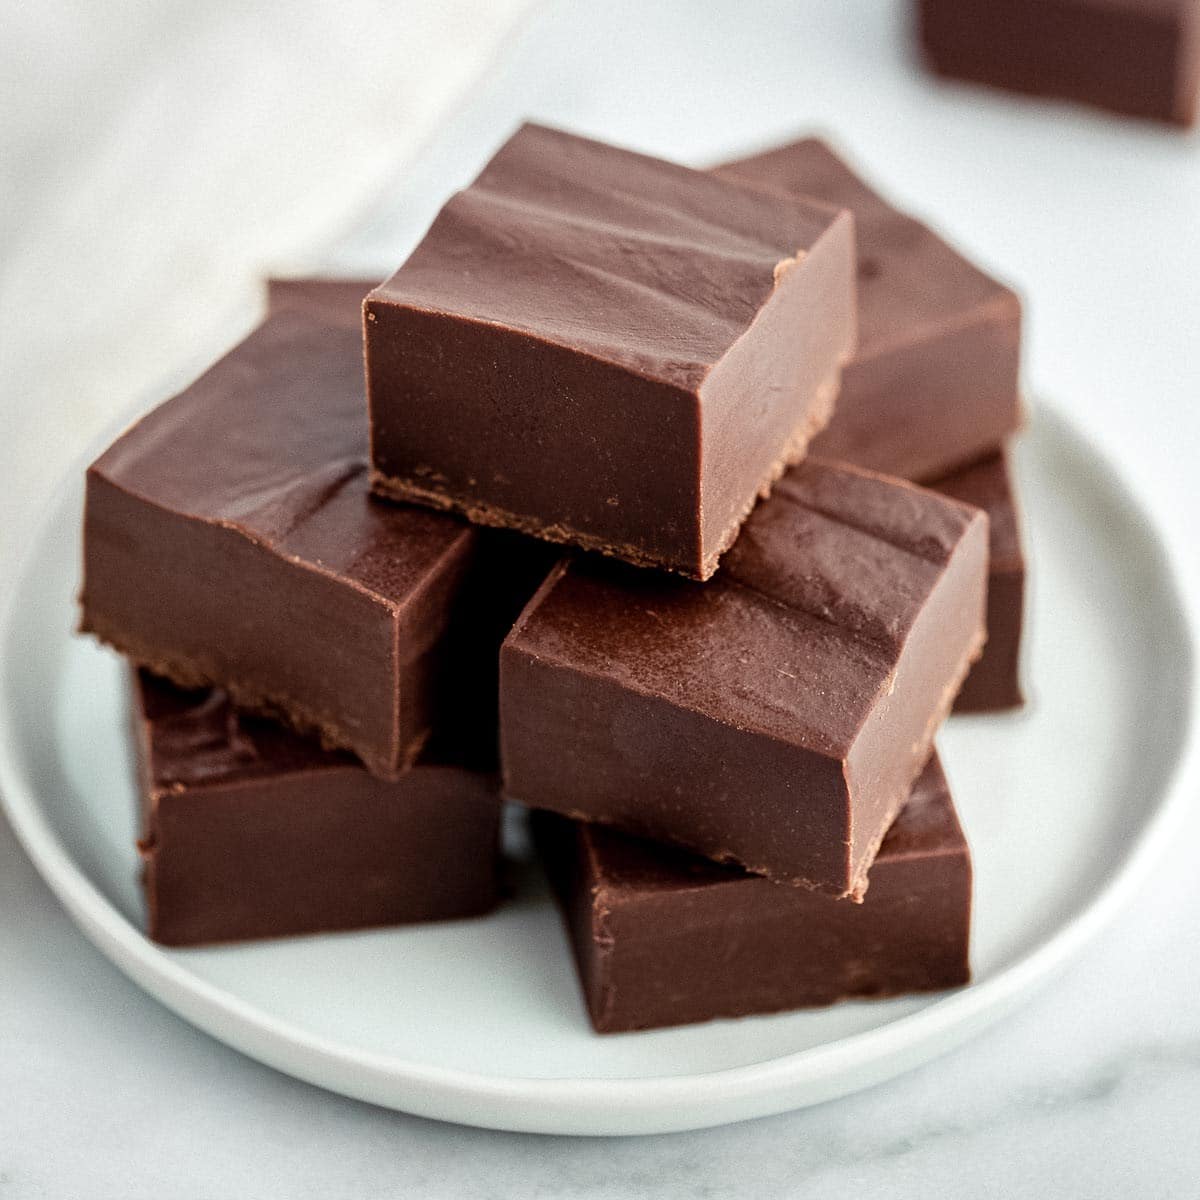 Can Fudge Go Bad? How to Store it Properly